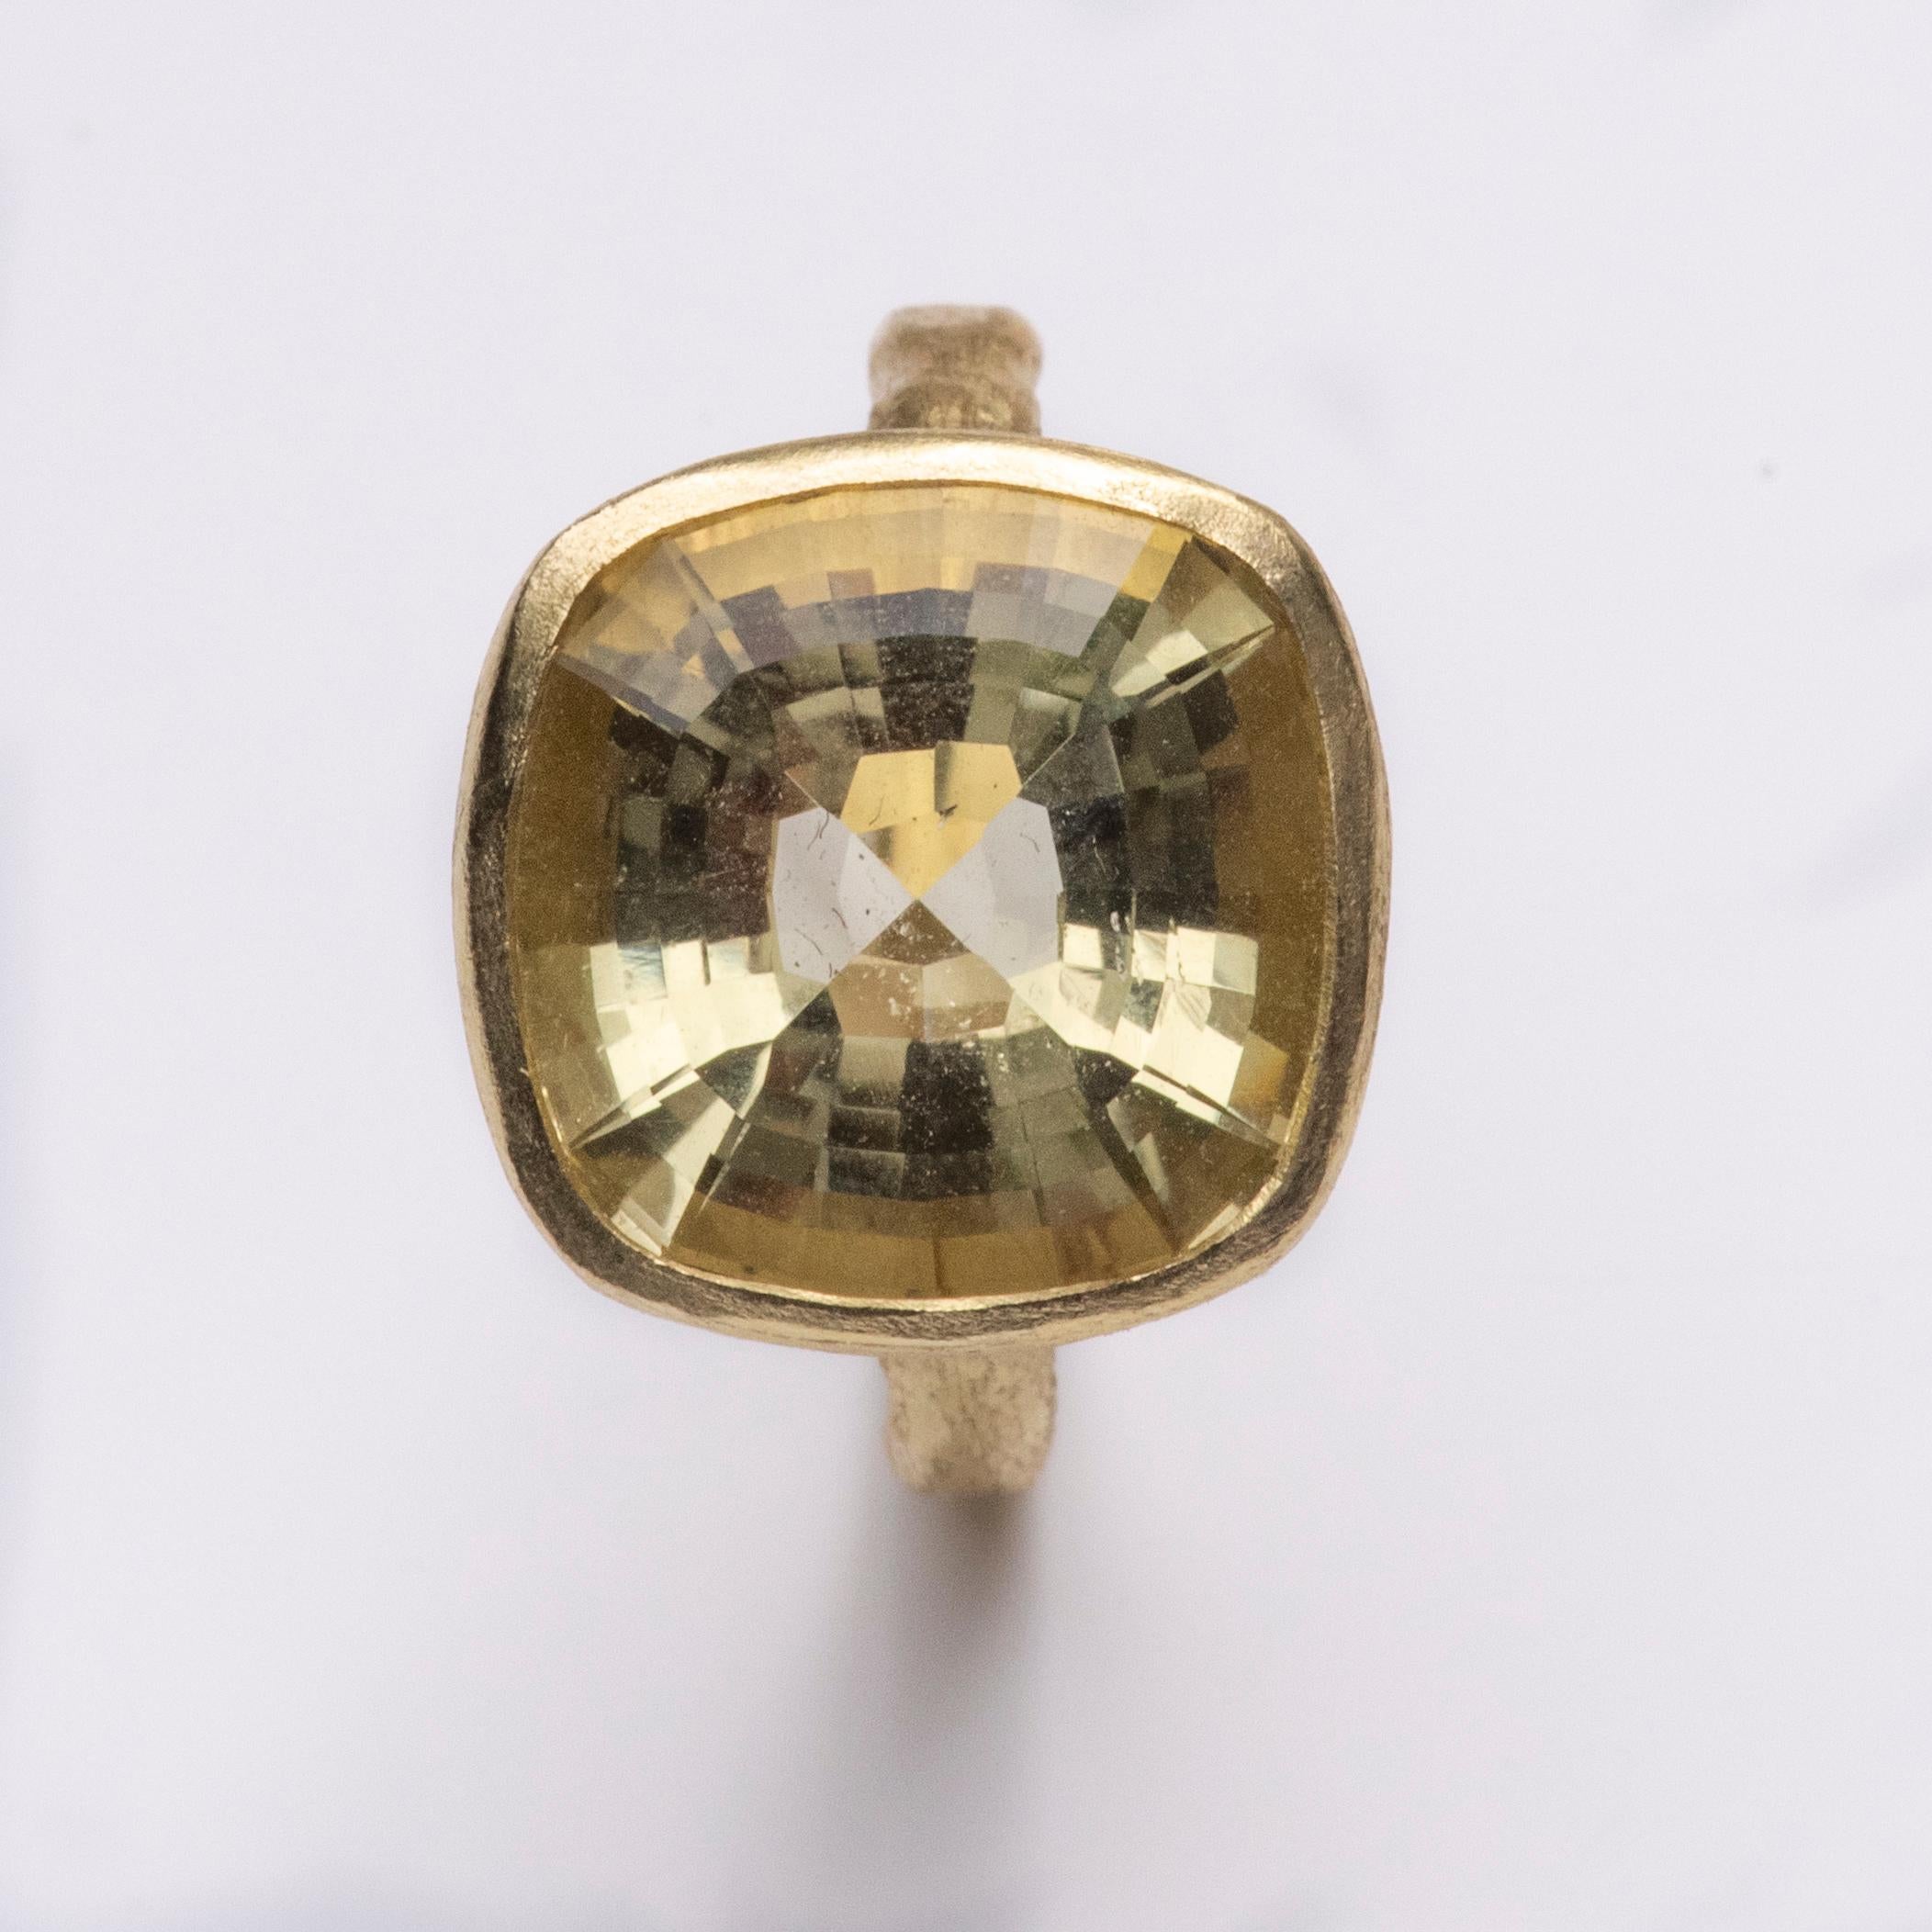 18k yellow gold handmade organic texture ring with stunning step-faceted cushion cut Lemon Quartz. At 9.27 carats this a fresh and exciting statement piece that can be worn on its own or in a stack.

Disa is known for her use of colourful and